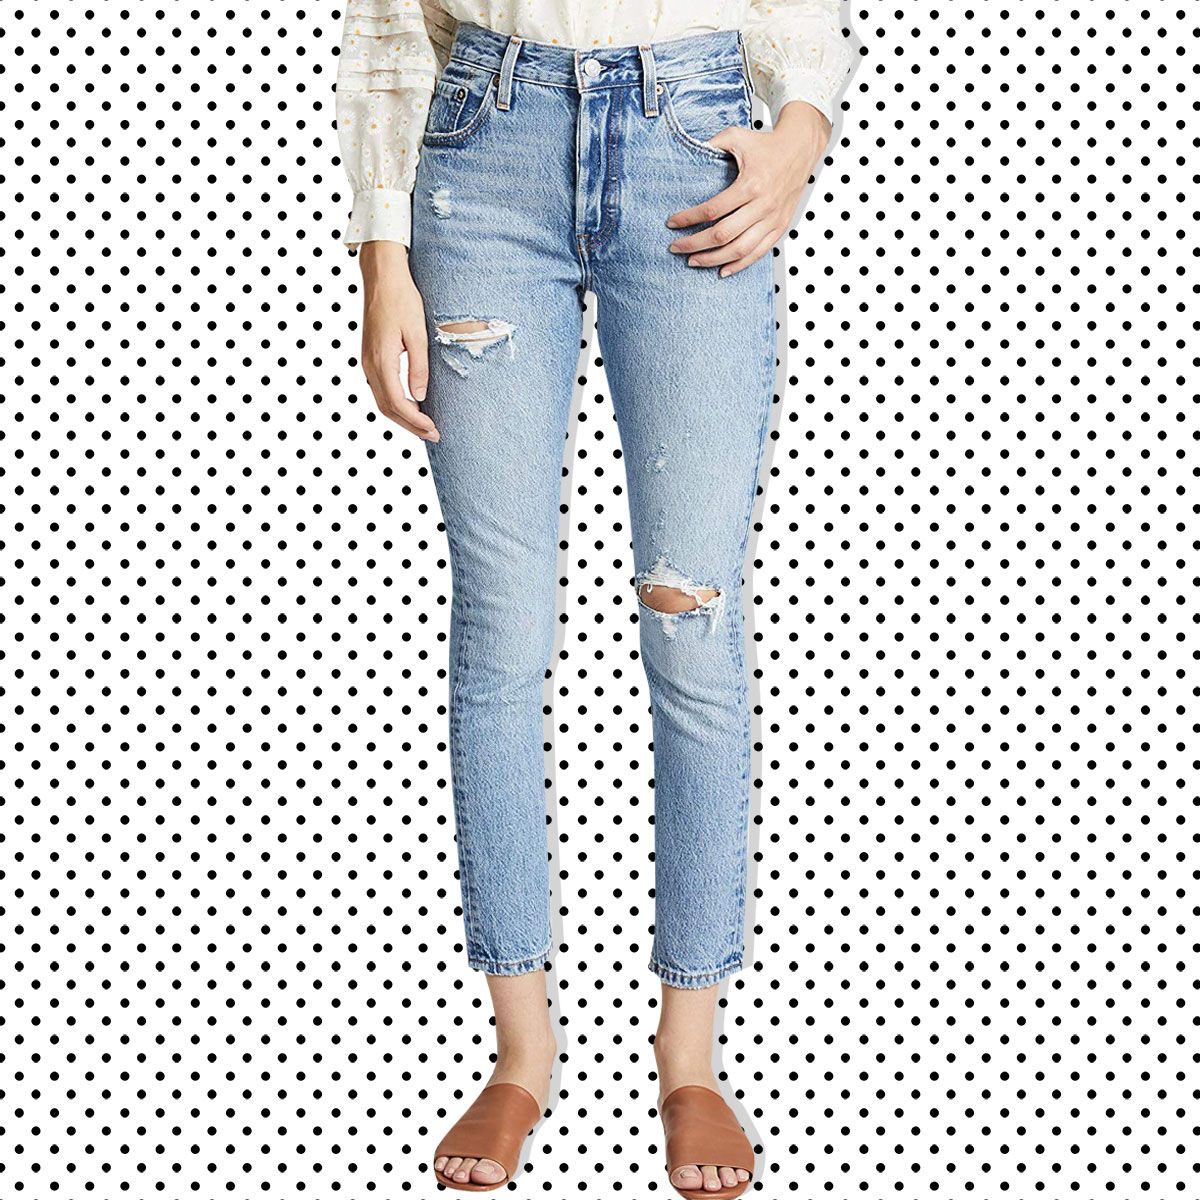 womens high waisted stretch jeans